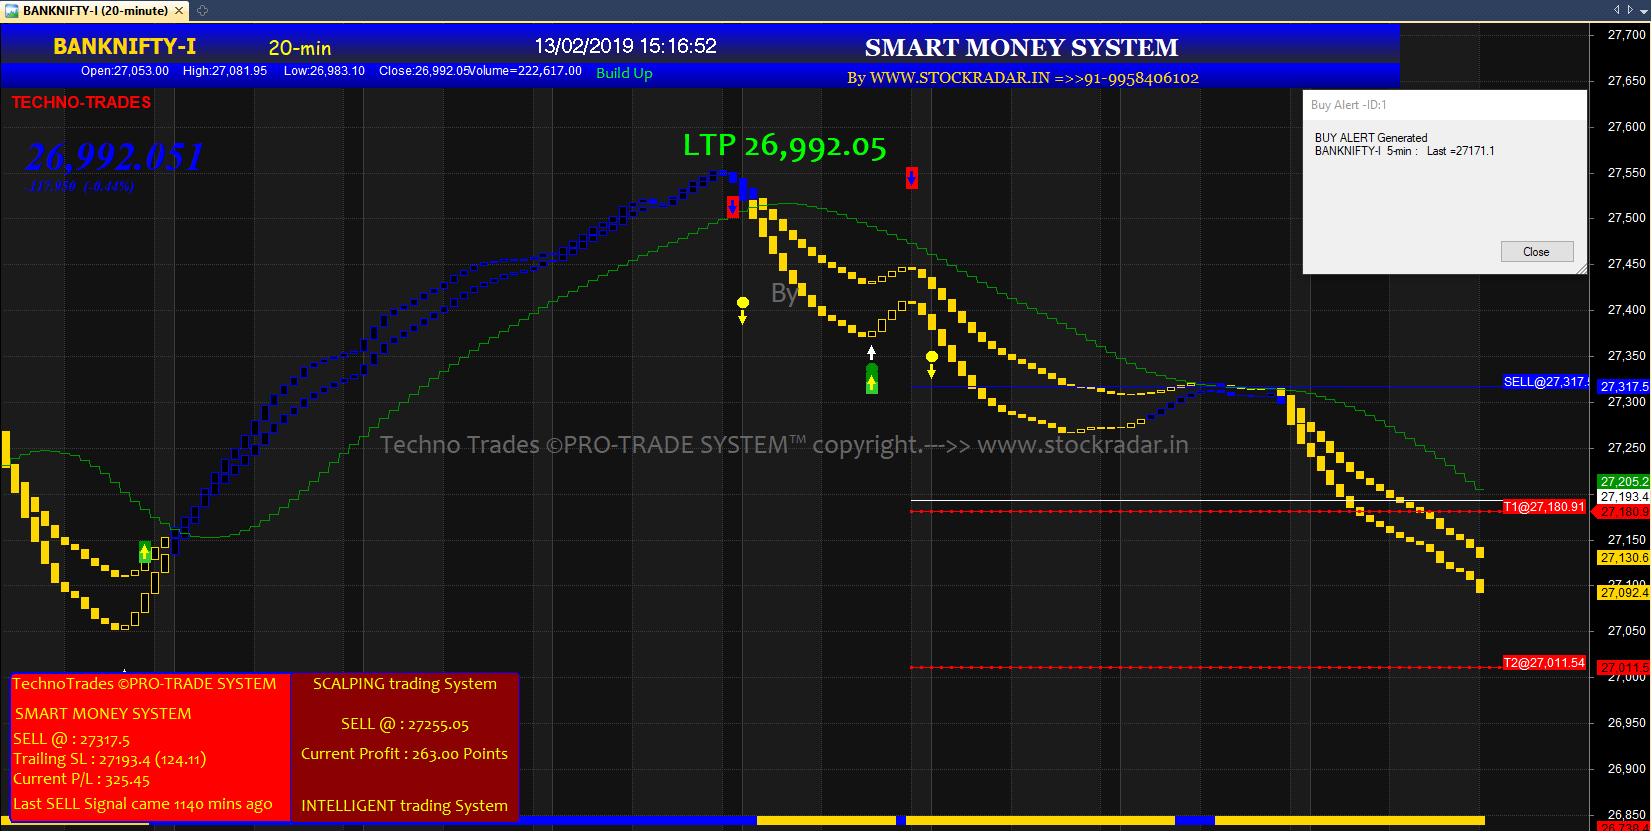 Free Intraday Software For Nse - Best Intraday Trading ... - The Facts